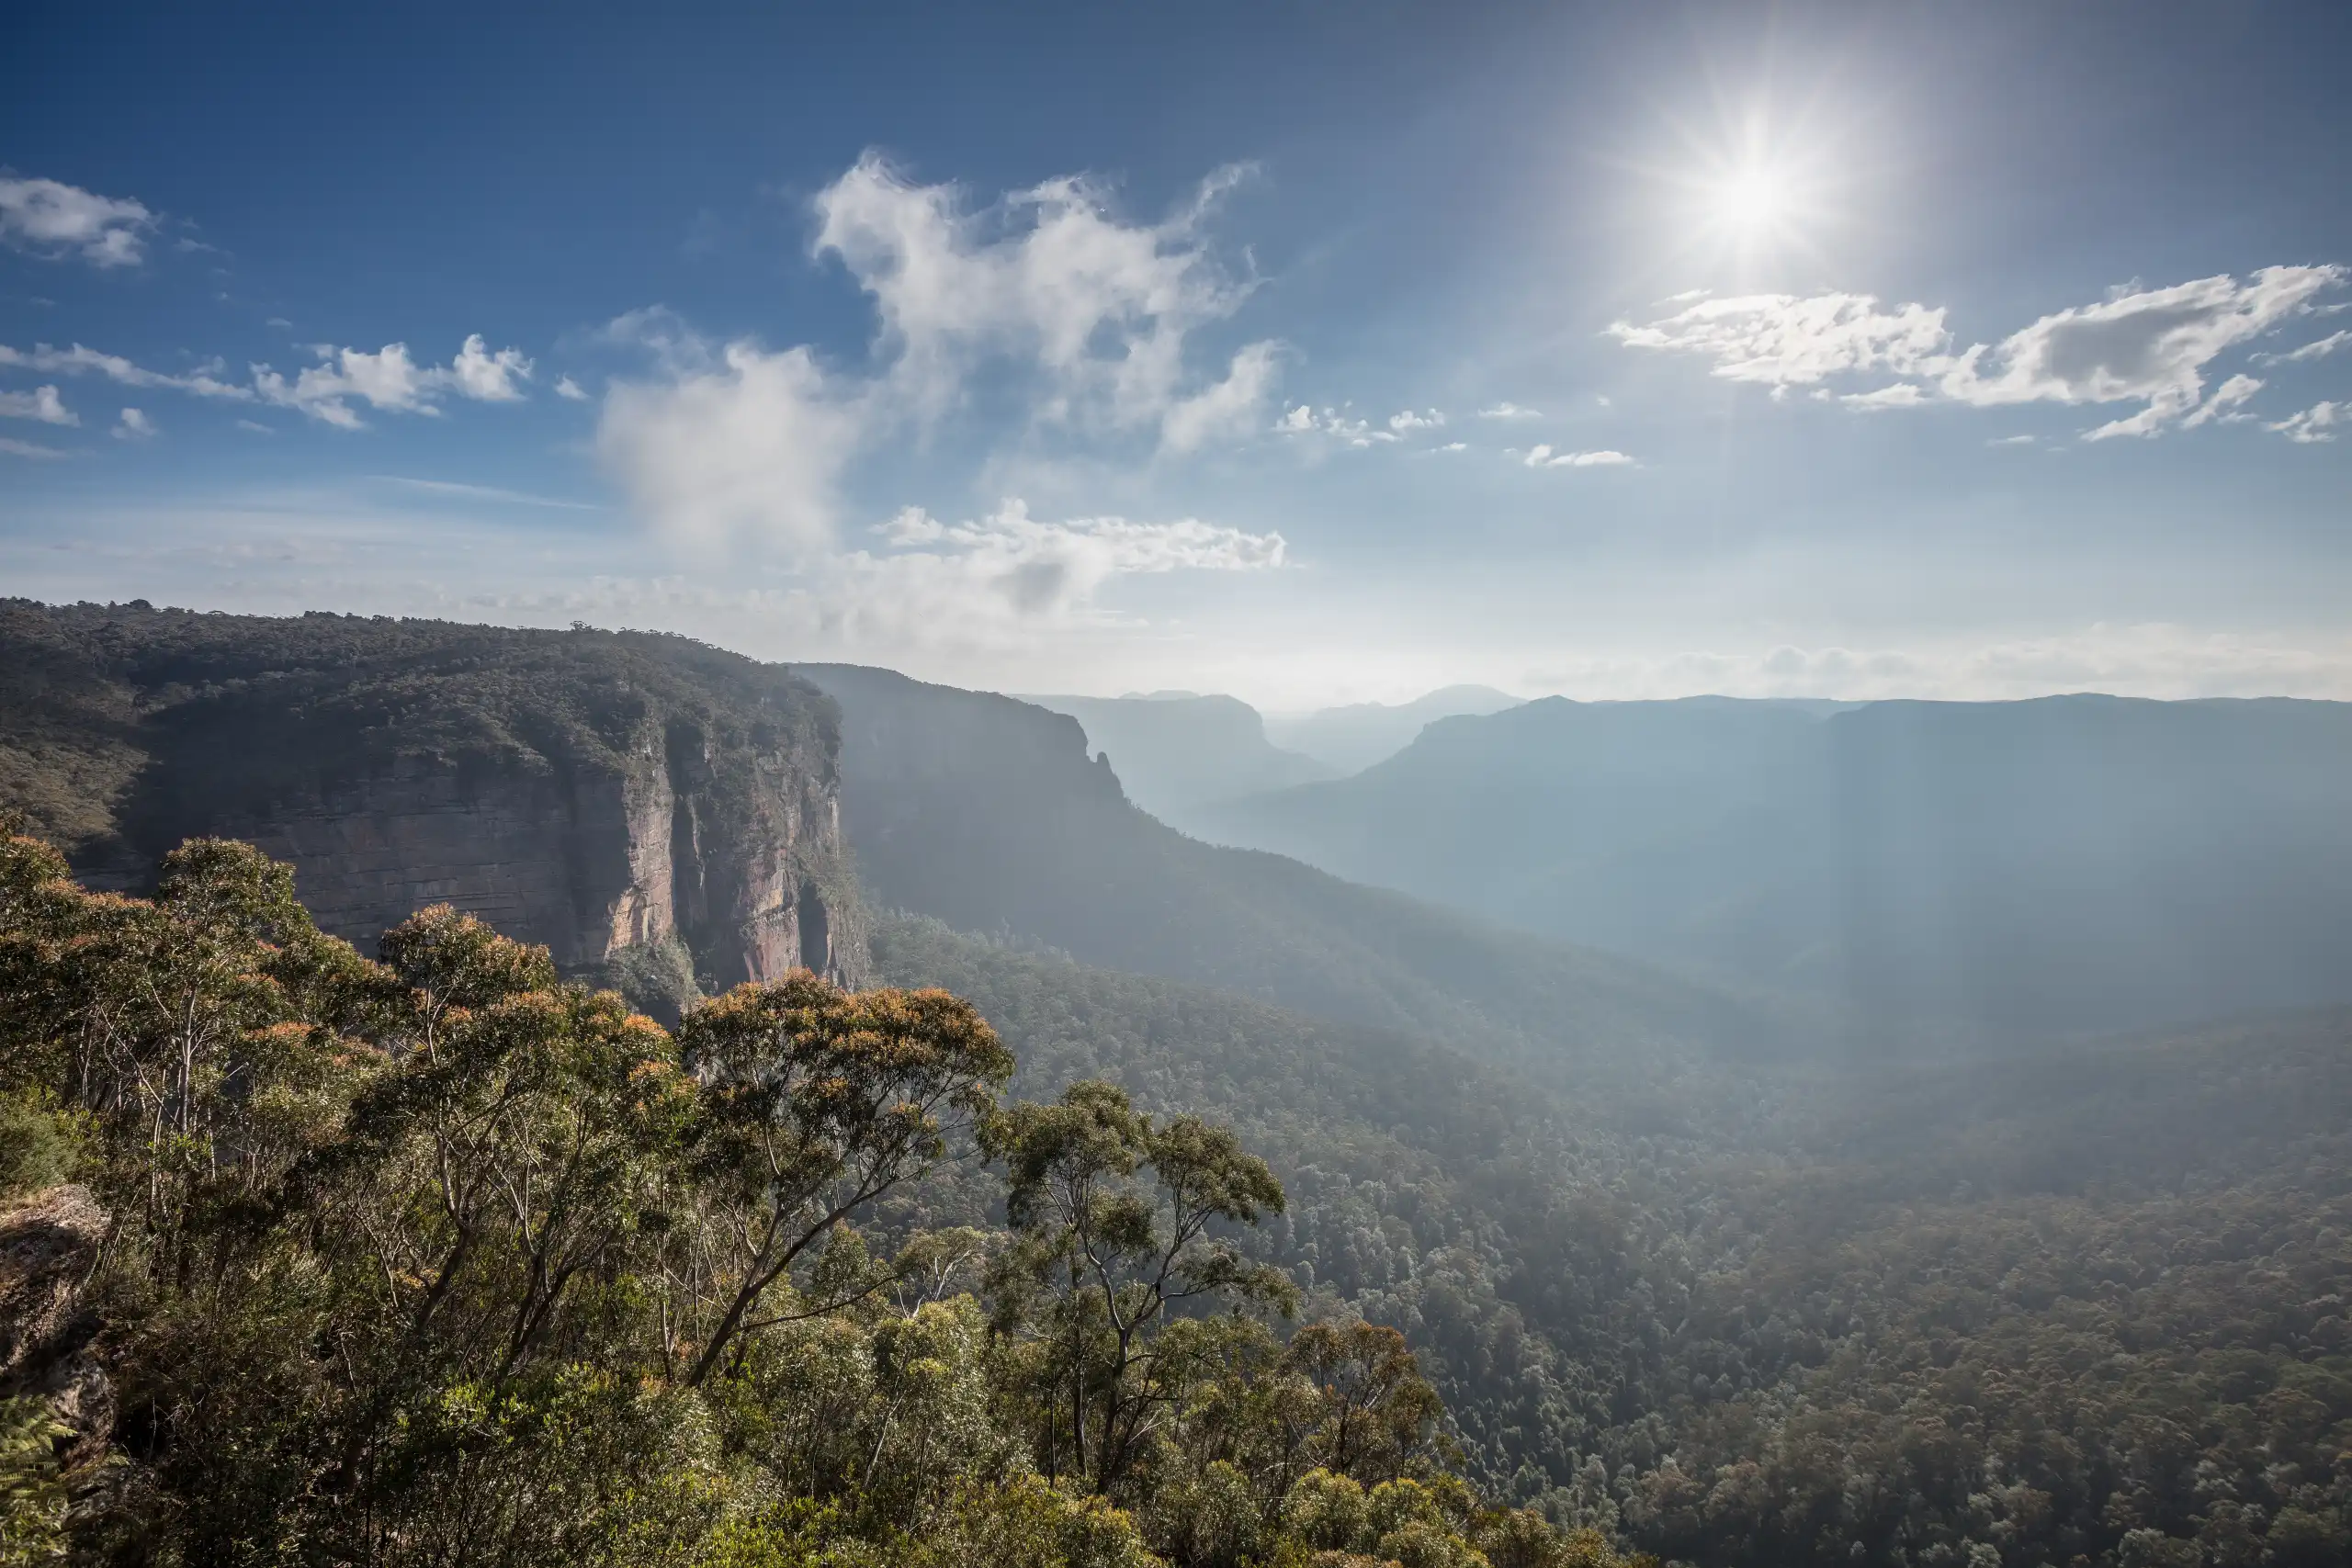 Landscape of the Blackheath viewed from the Govett’s Leap lookout in New South Wales, Australia.